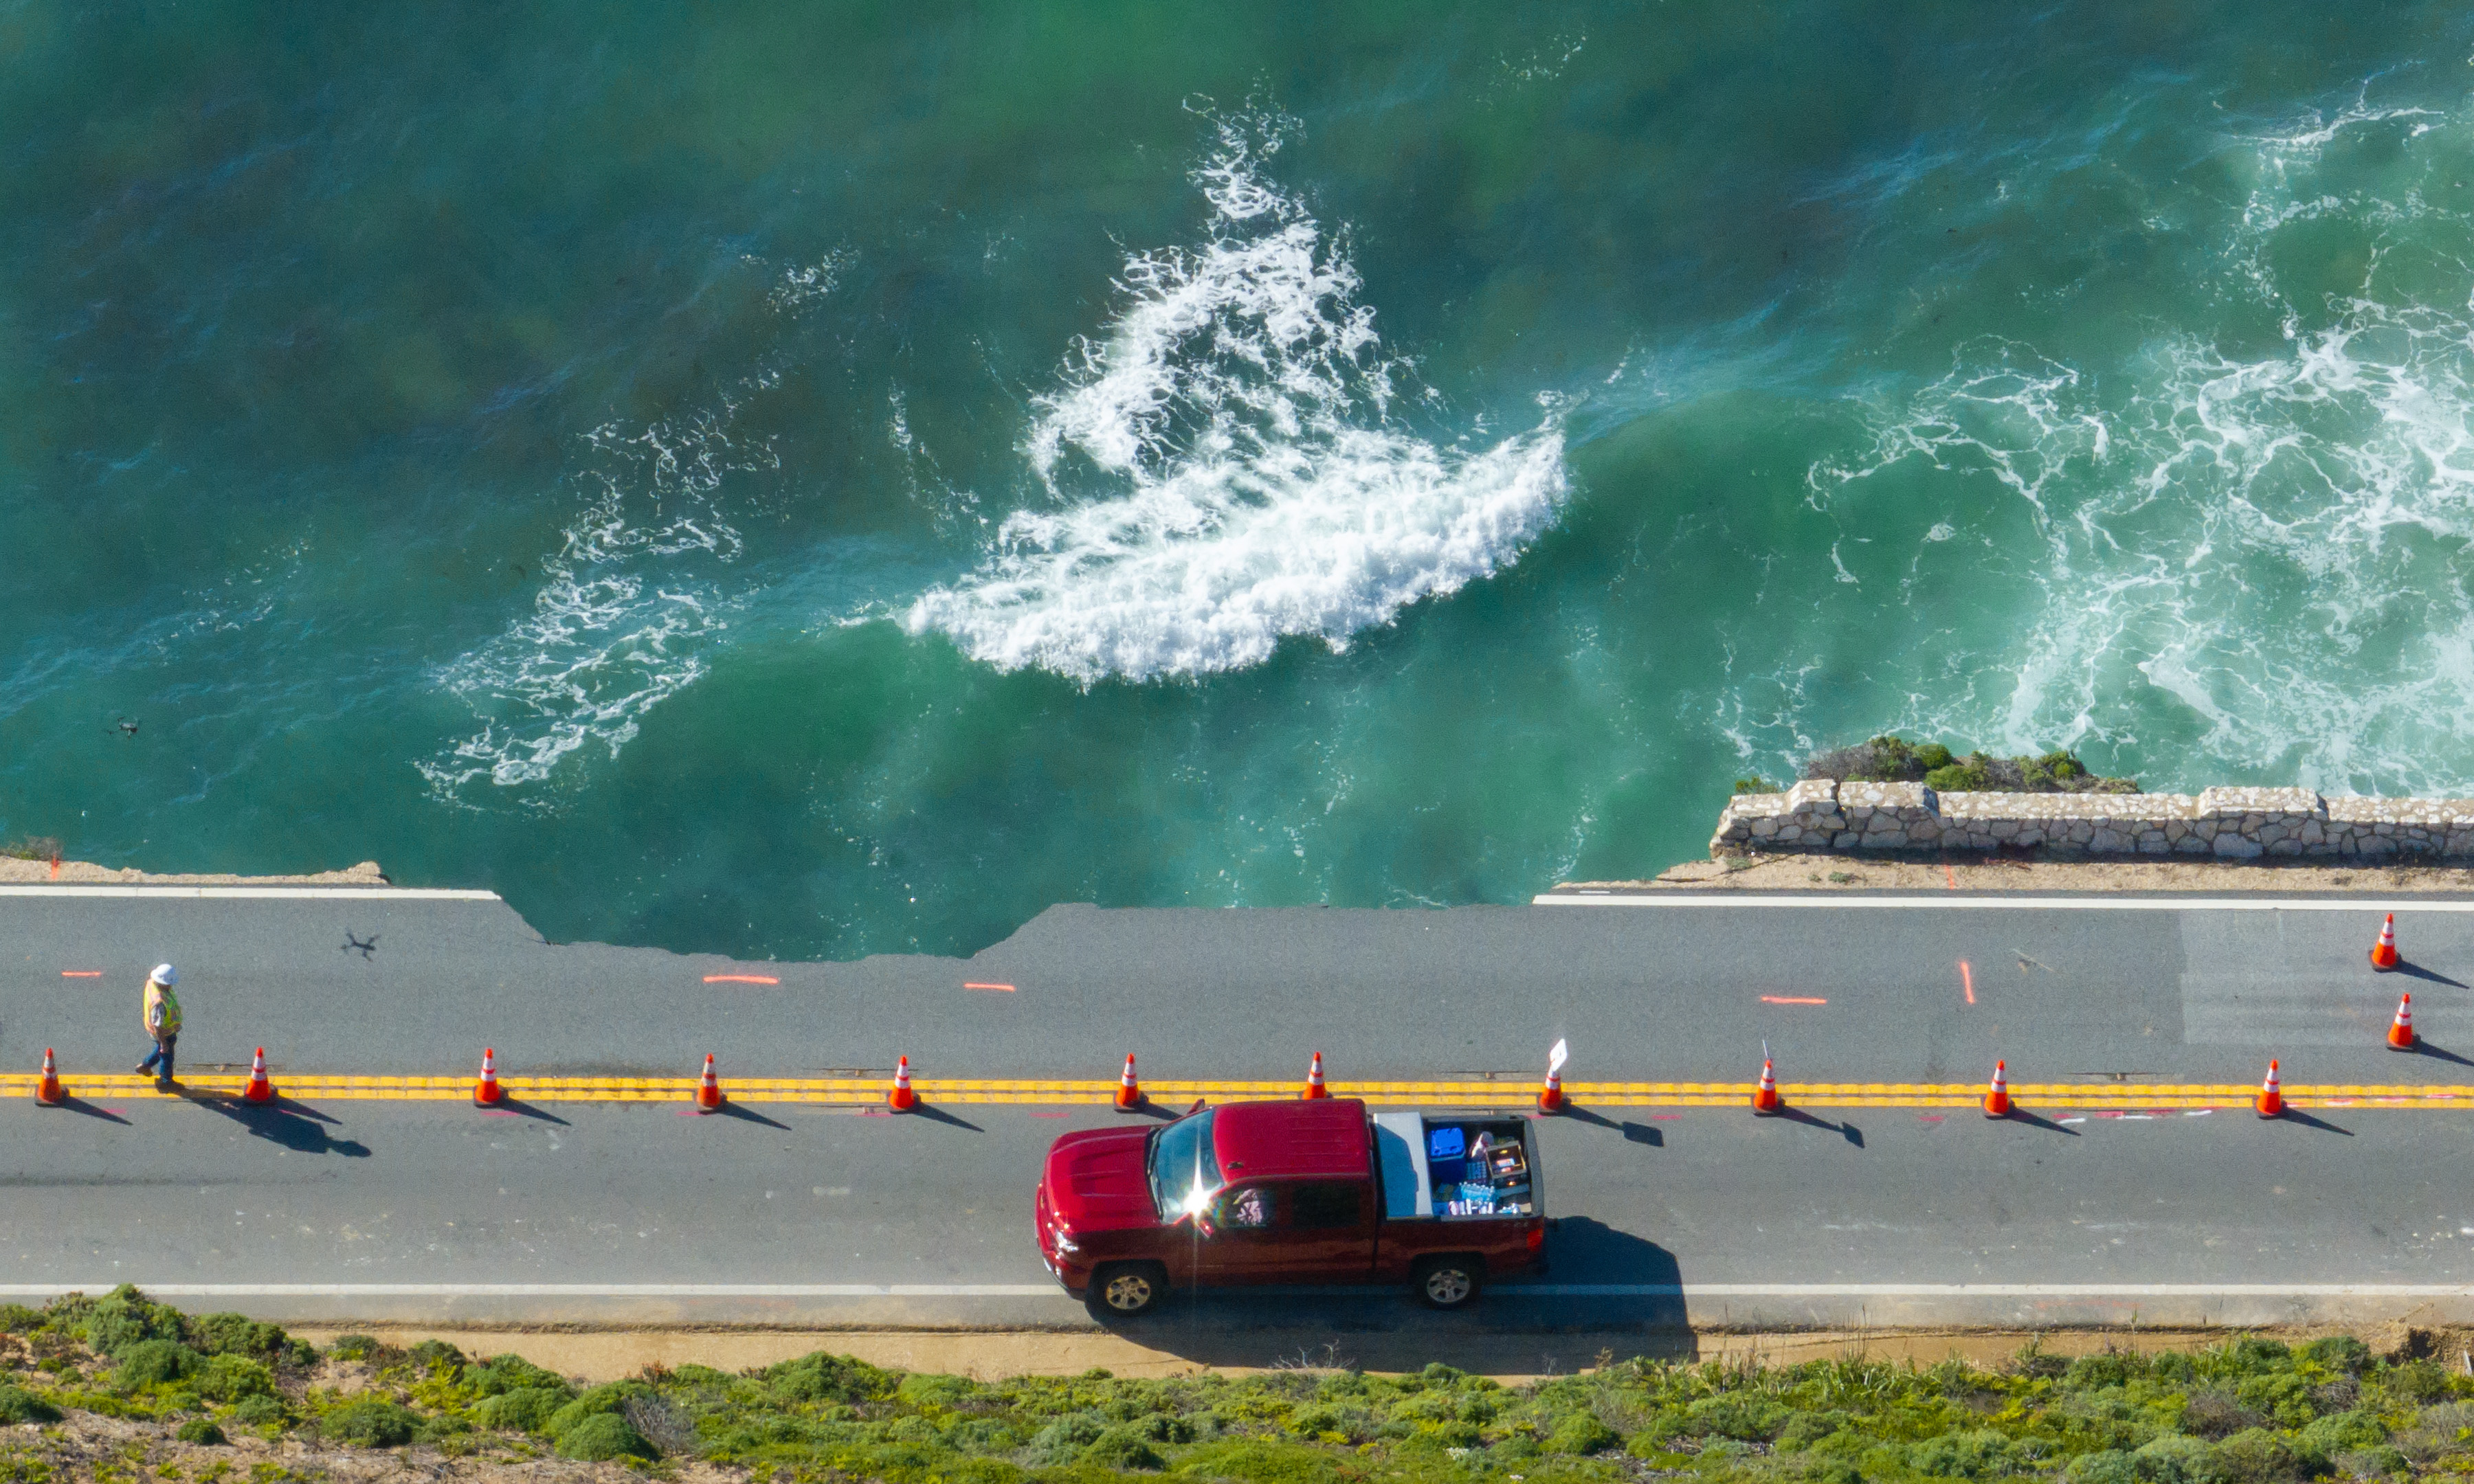 Aerial view of a red truck on a coastal road beside a turbulent teal sea and a walking worker.